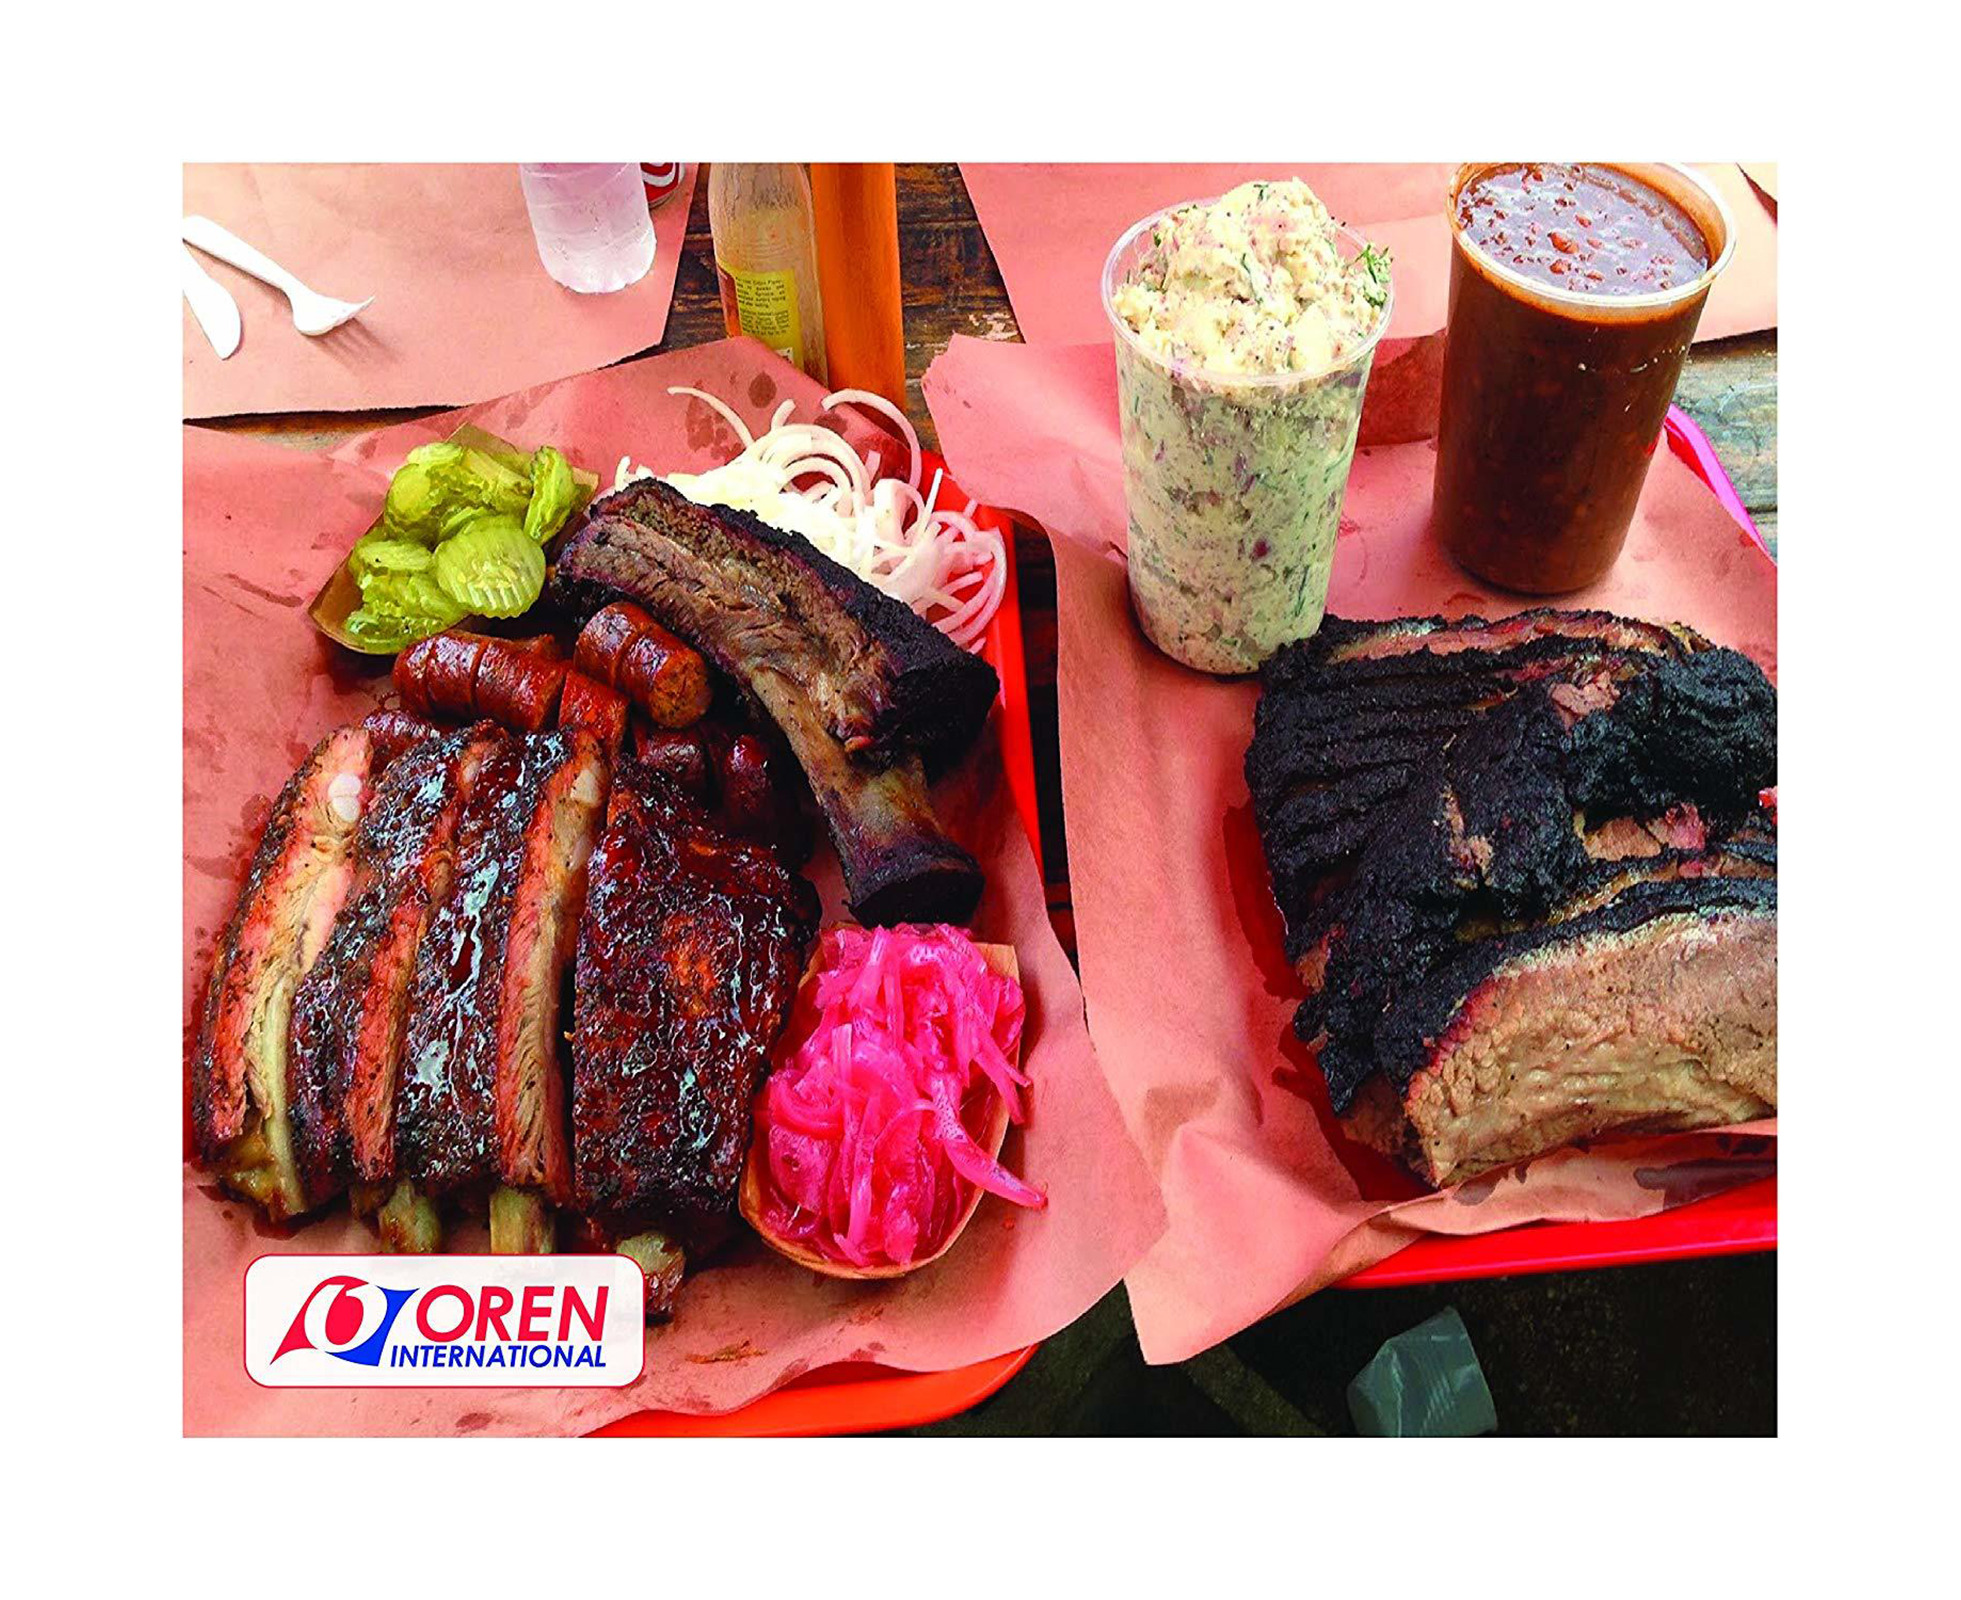 Food Grade Butchers Paper 24 1000FT (Oren Pink) Commercial size - The BBQ  King - One of Australia's Leading BBQ Stores